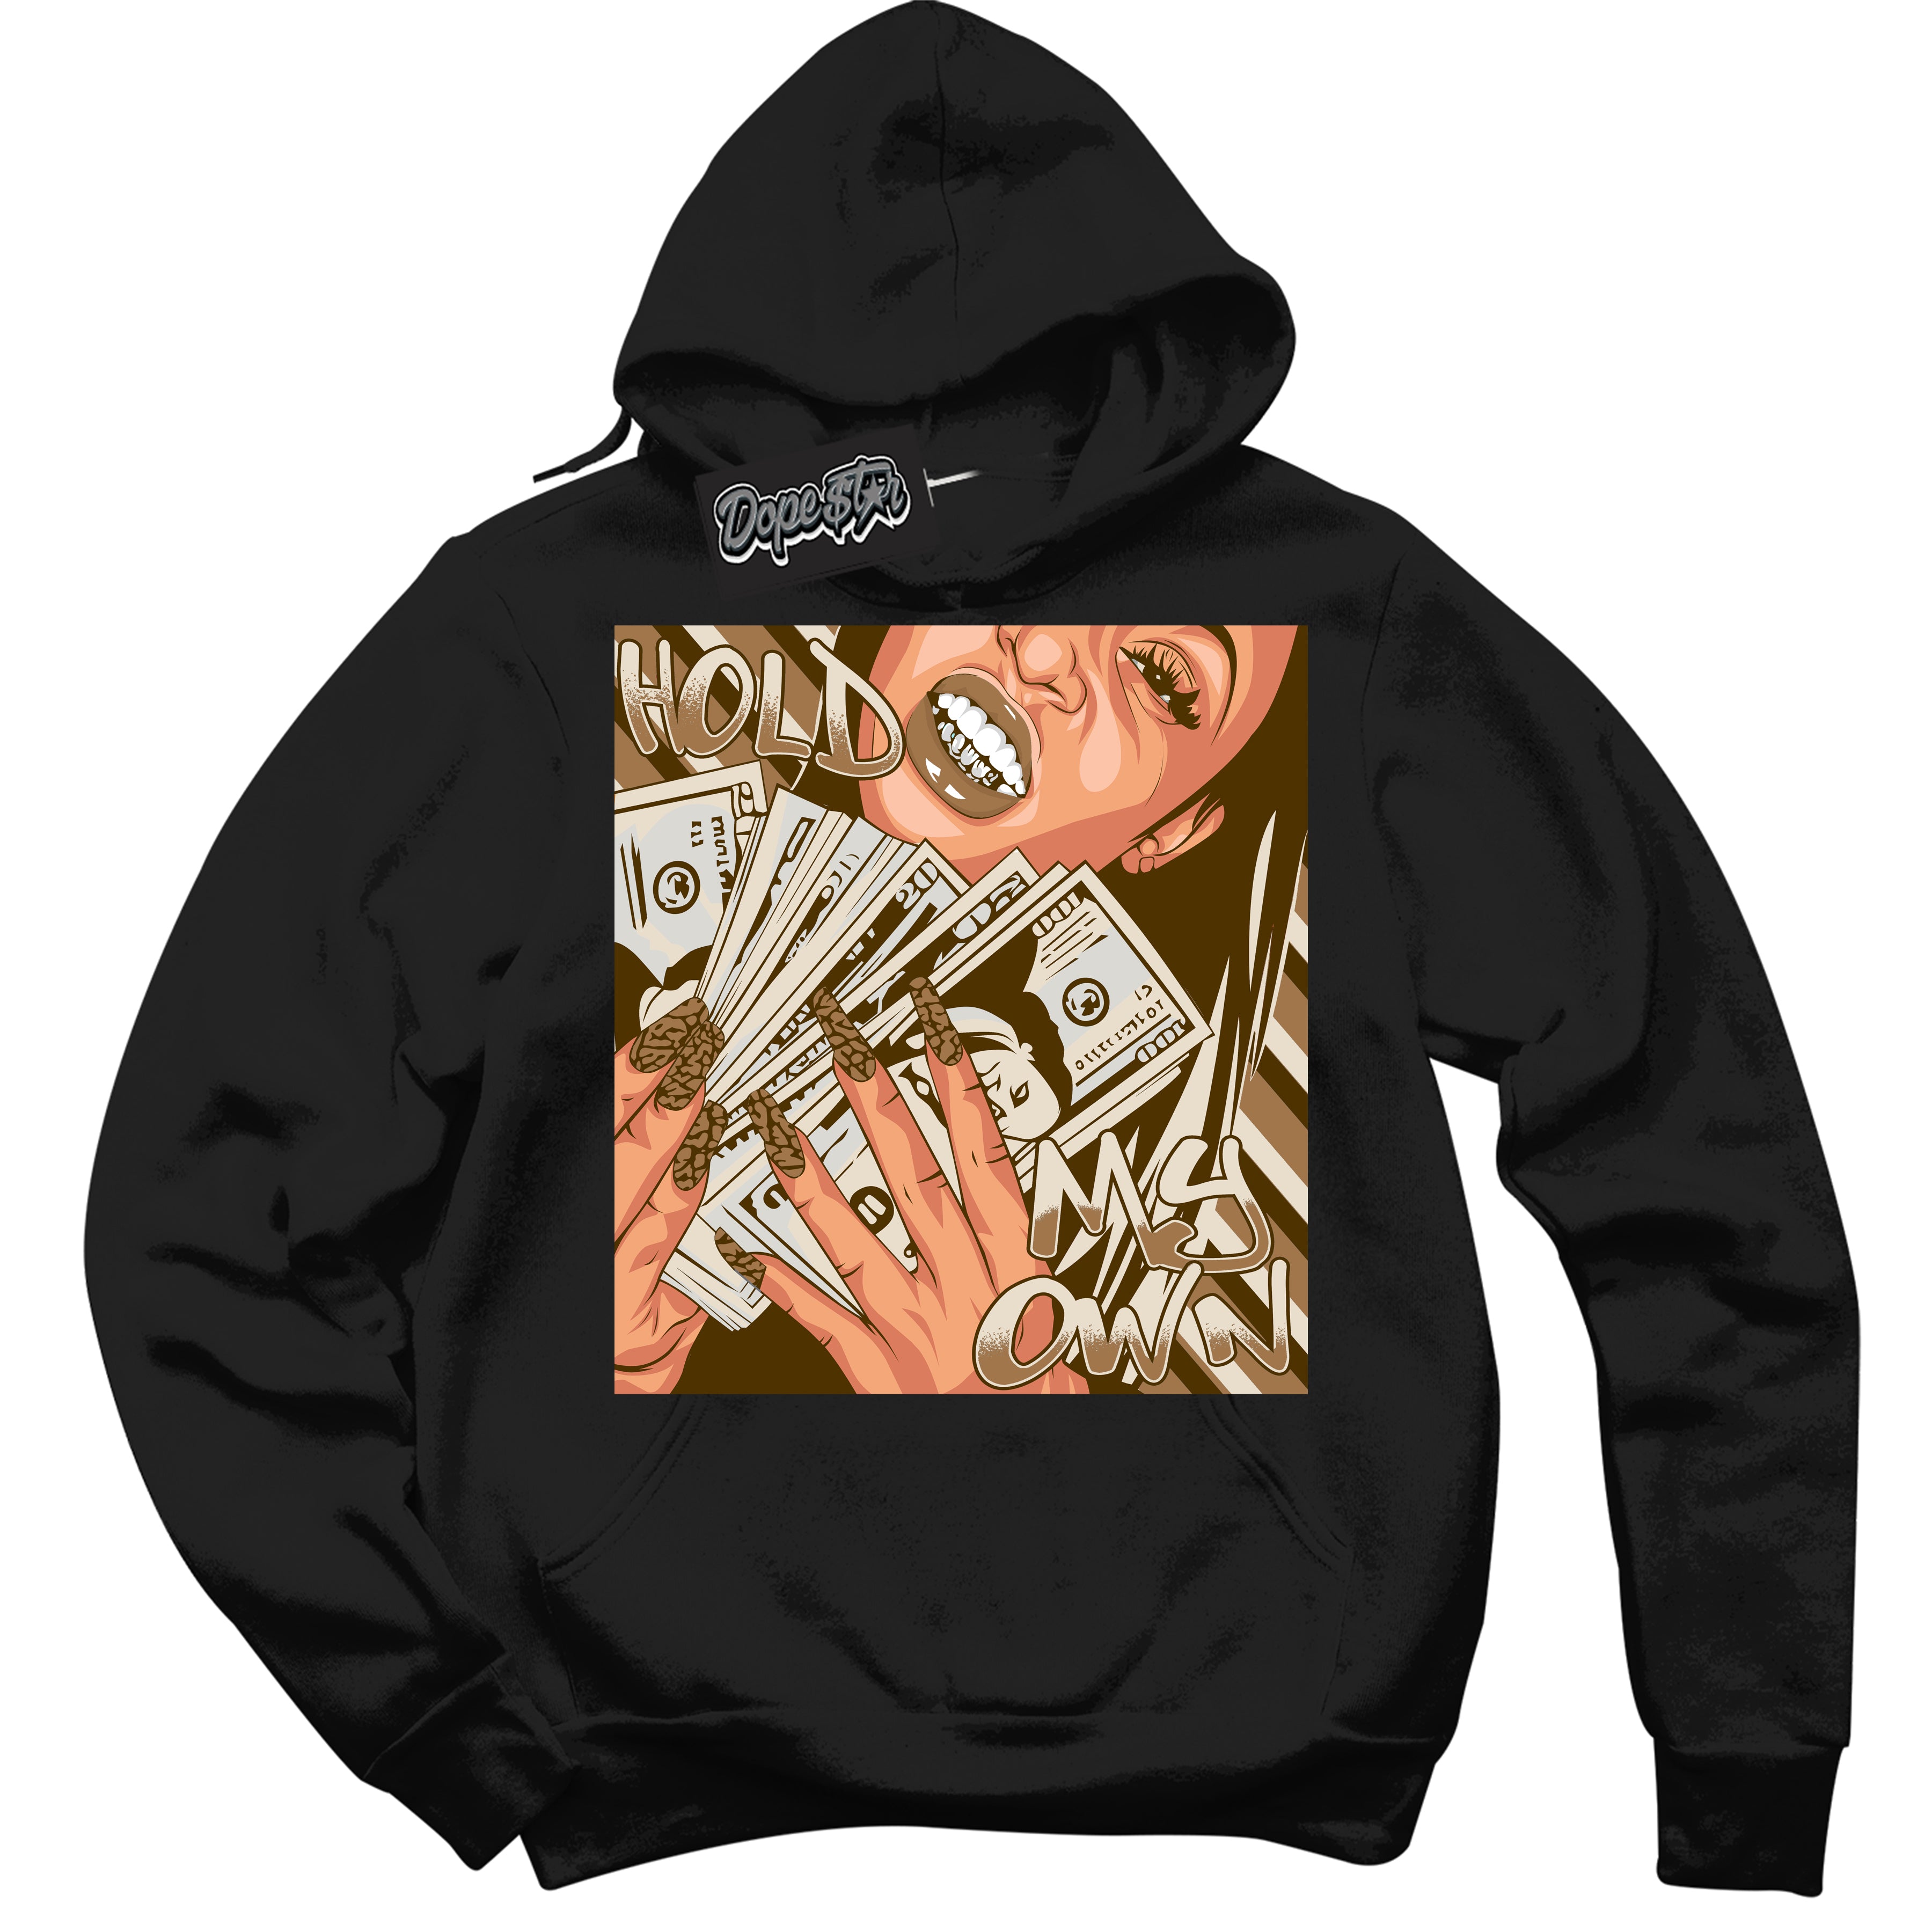 Cool Black Graphic DopeStar Hoodie with “ Hold My Own “ print, that perfectly matches Palomino 3s sneakers